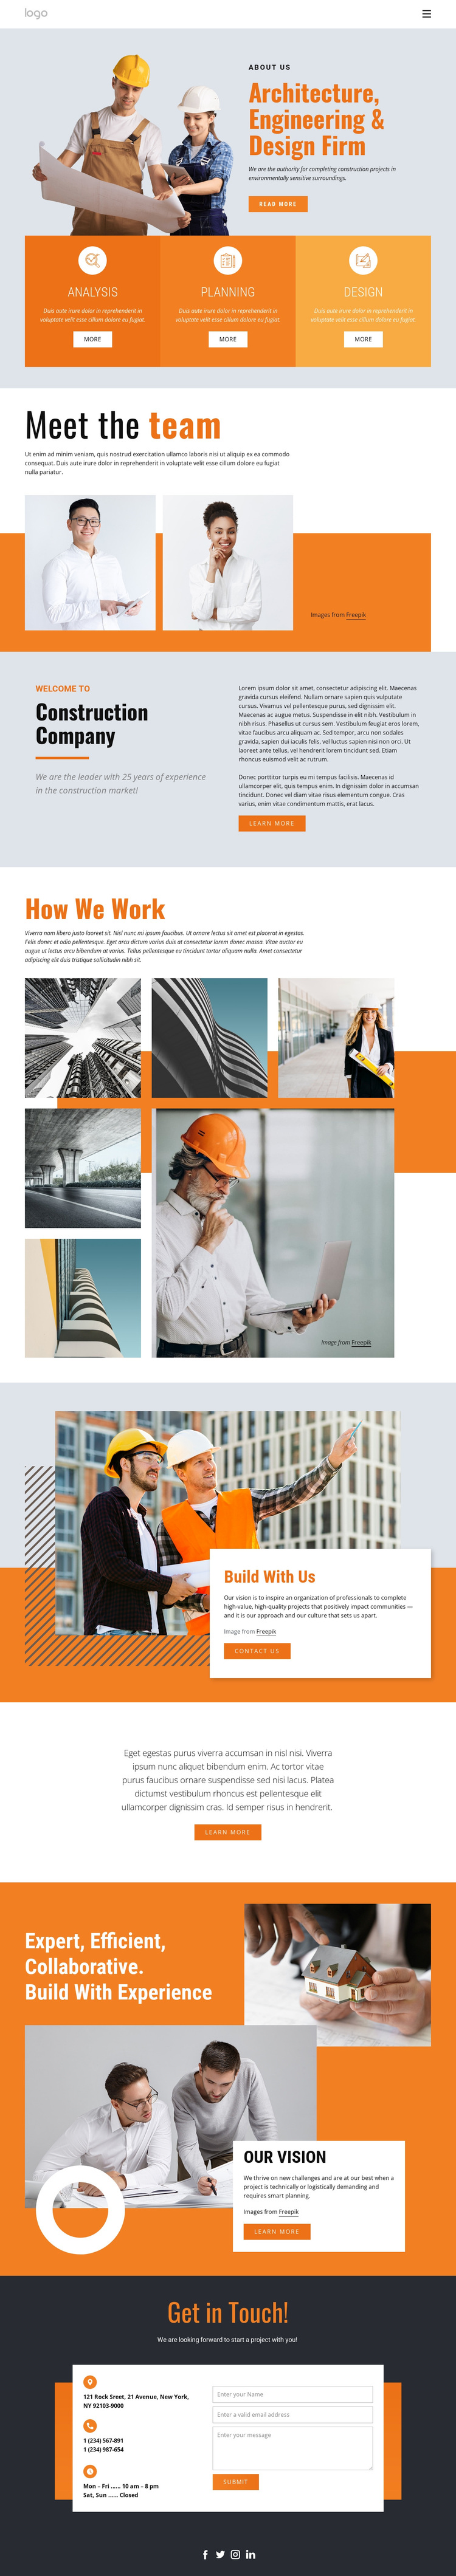 Engineering firm Template